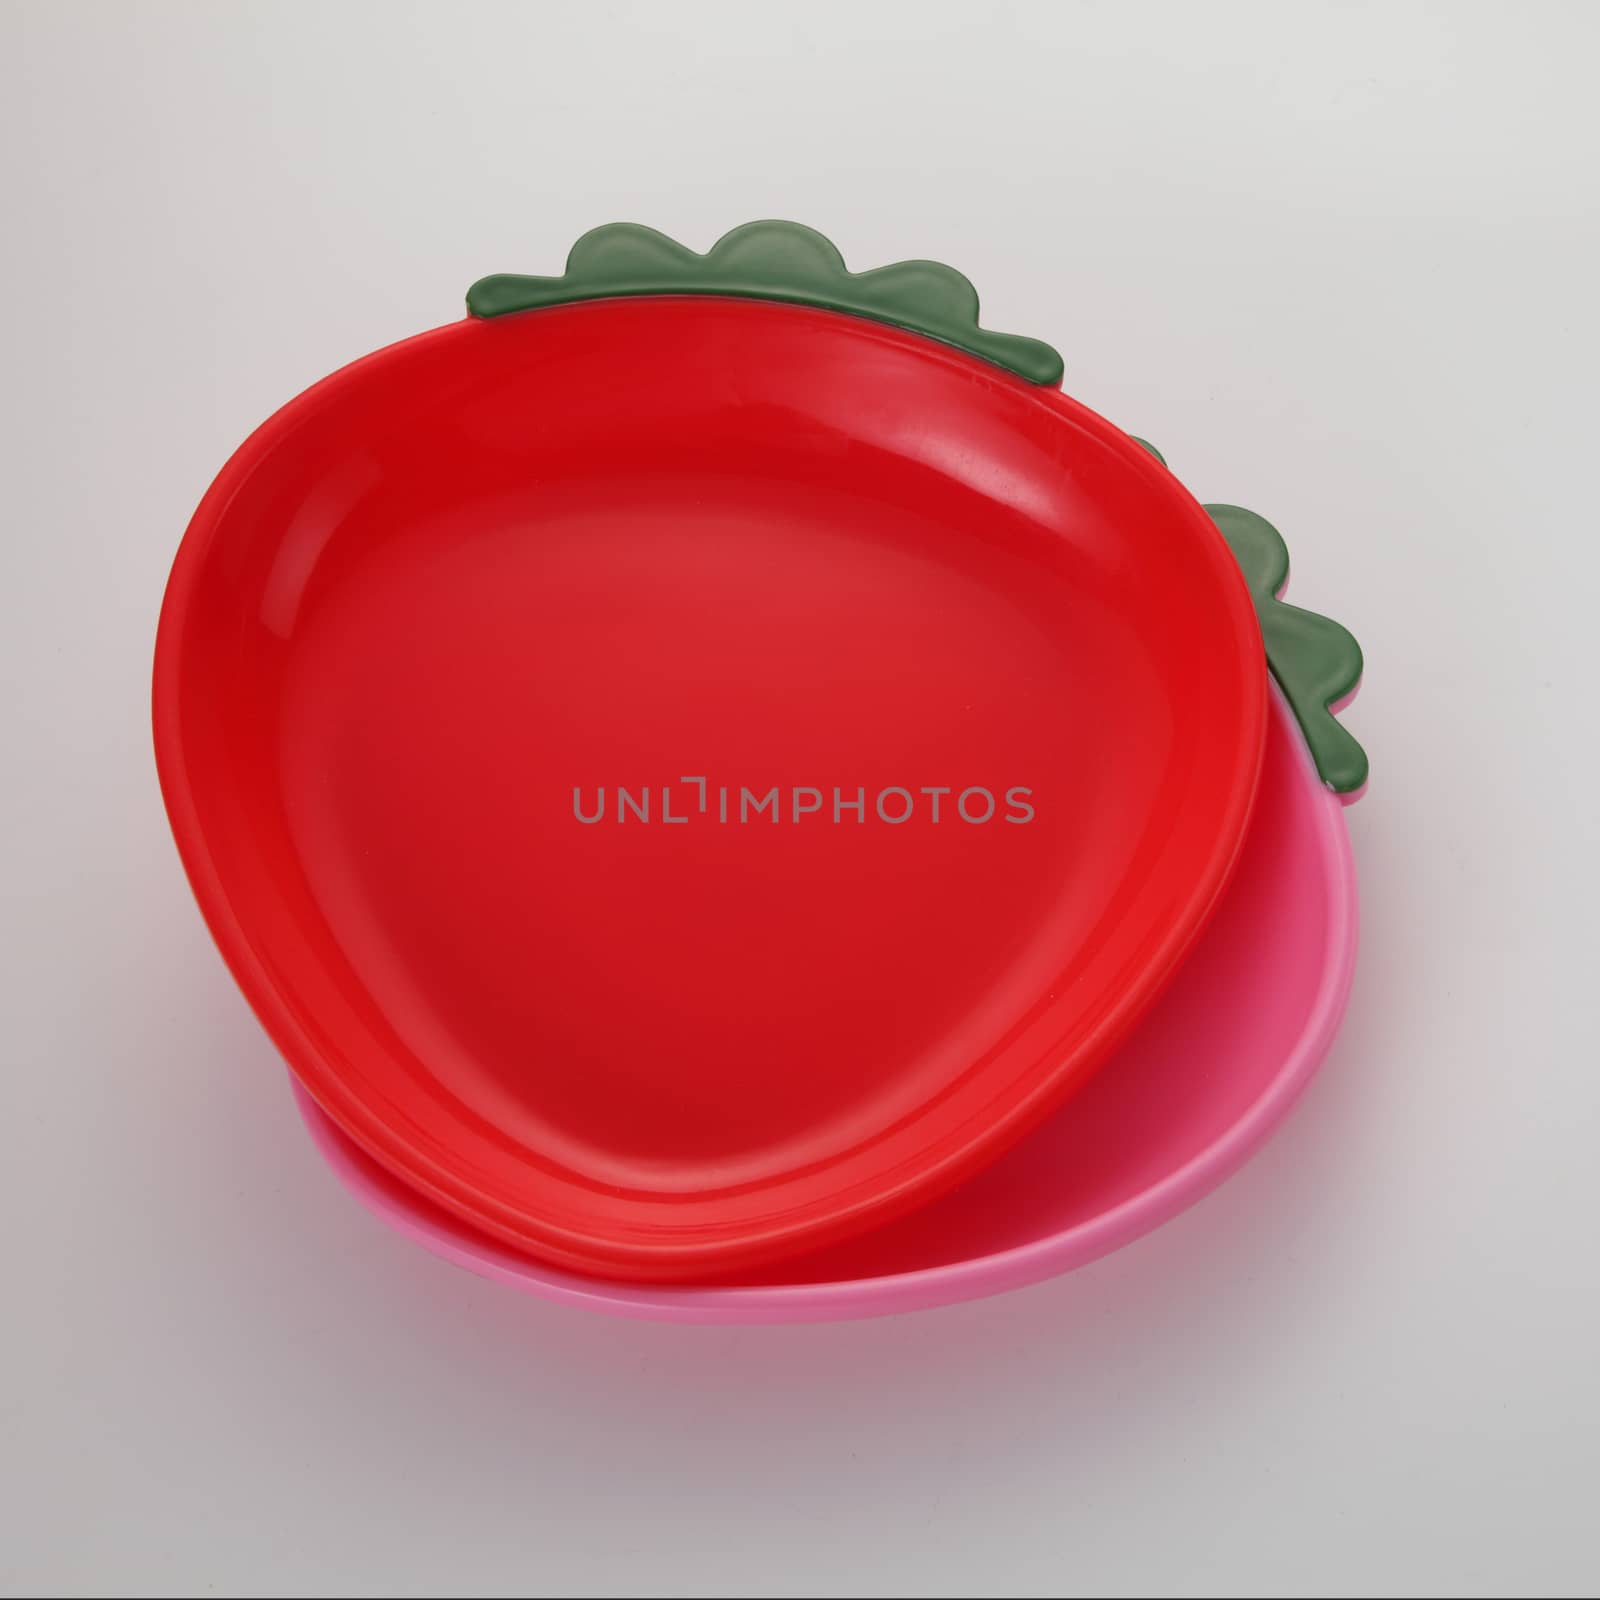 Red strawberry shaped plate on the white background